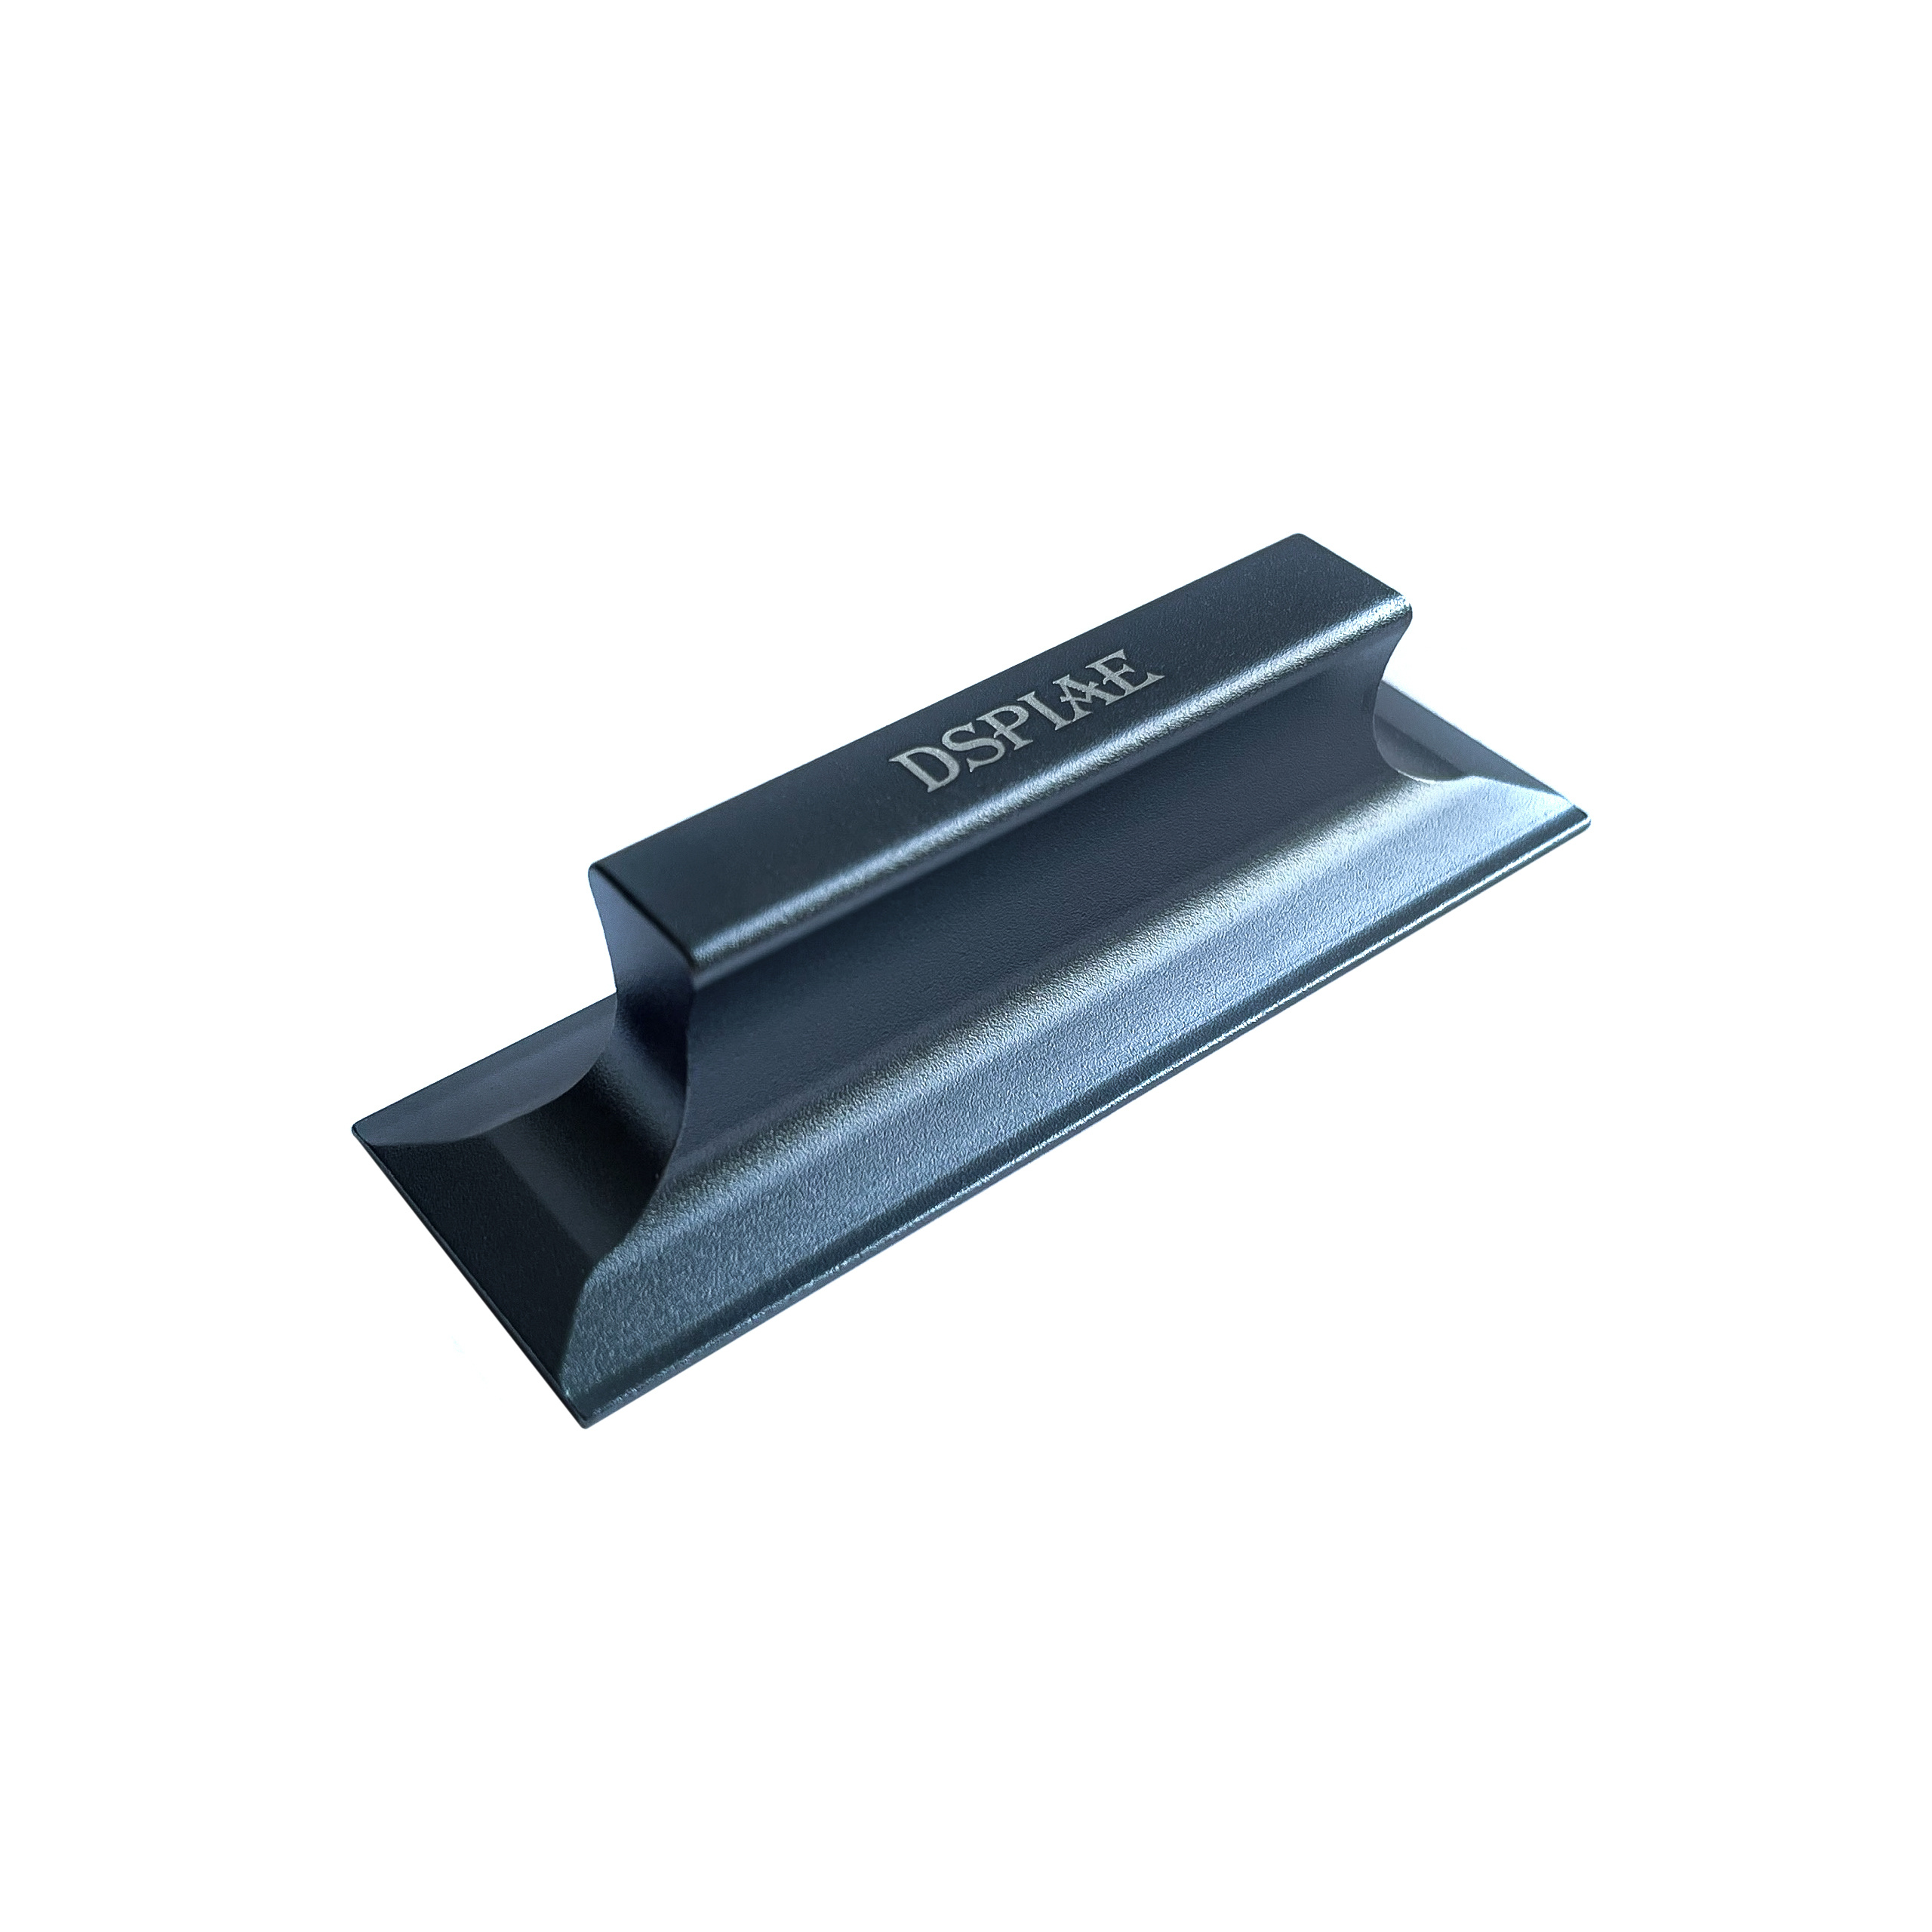 AS-25FPGY DPSIAE Flat Sanding Paper Holder (Grey)